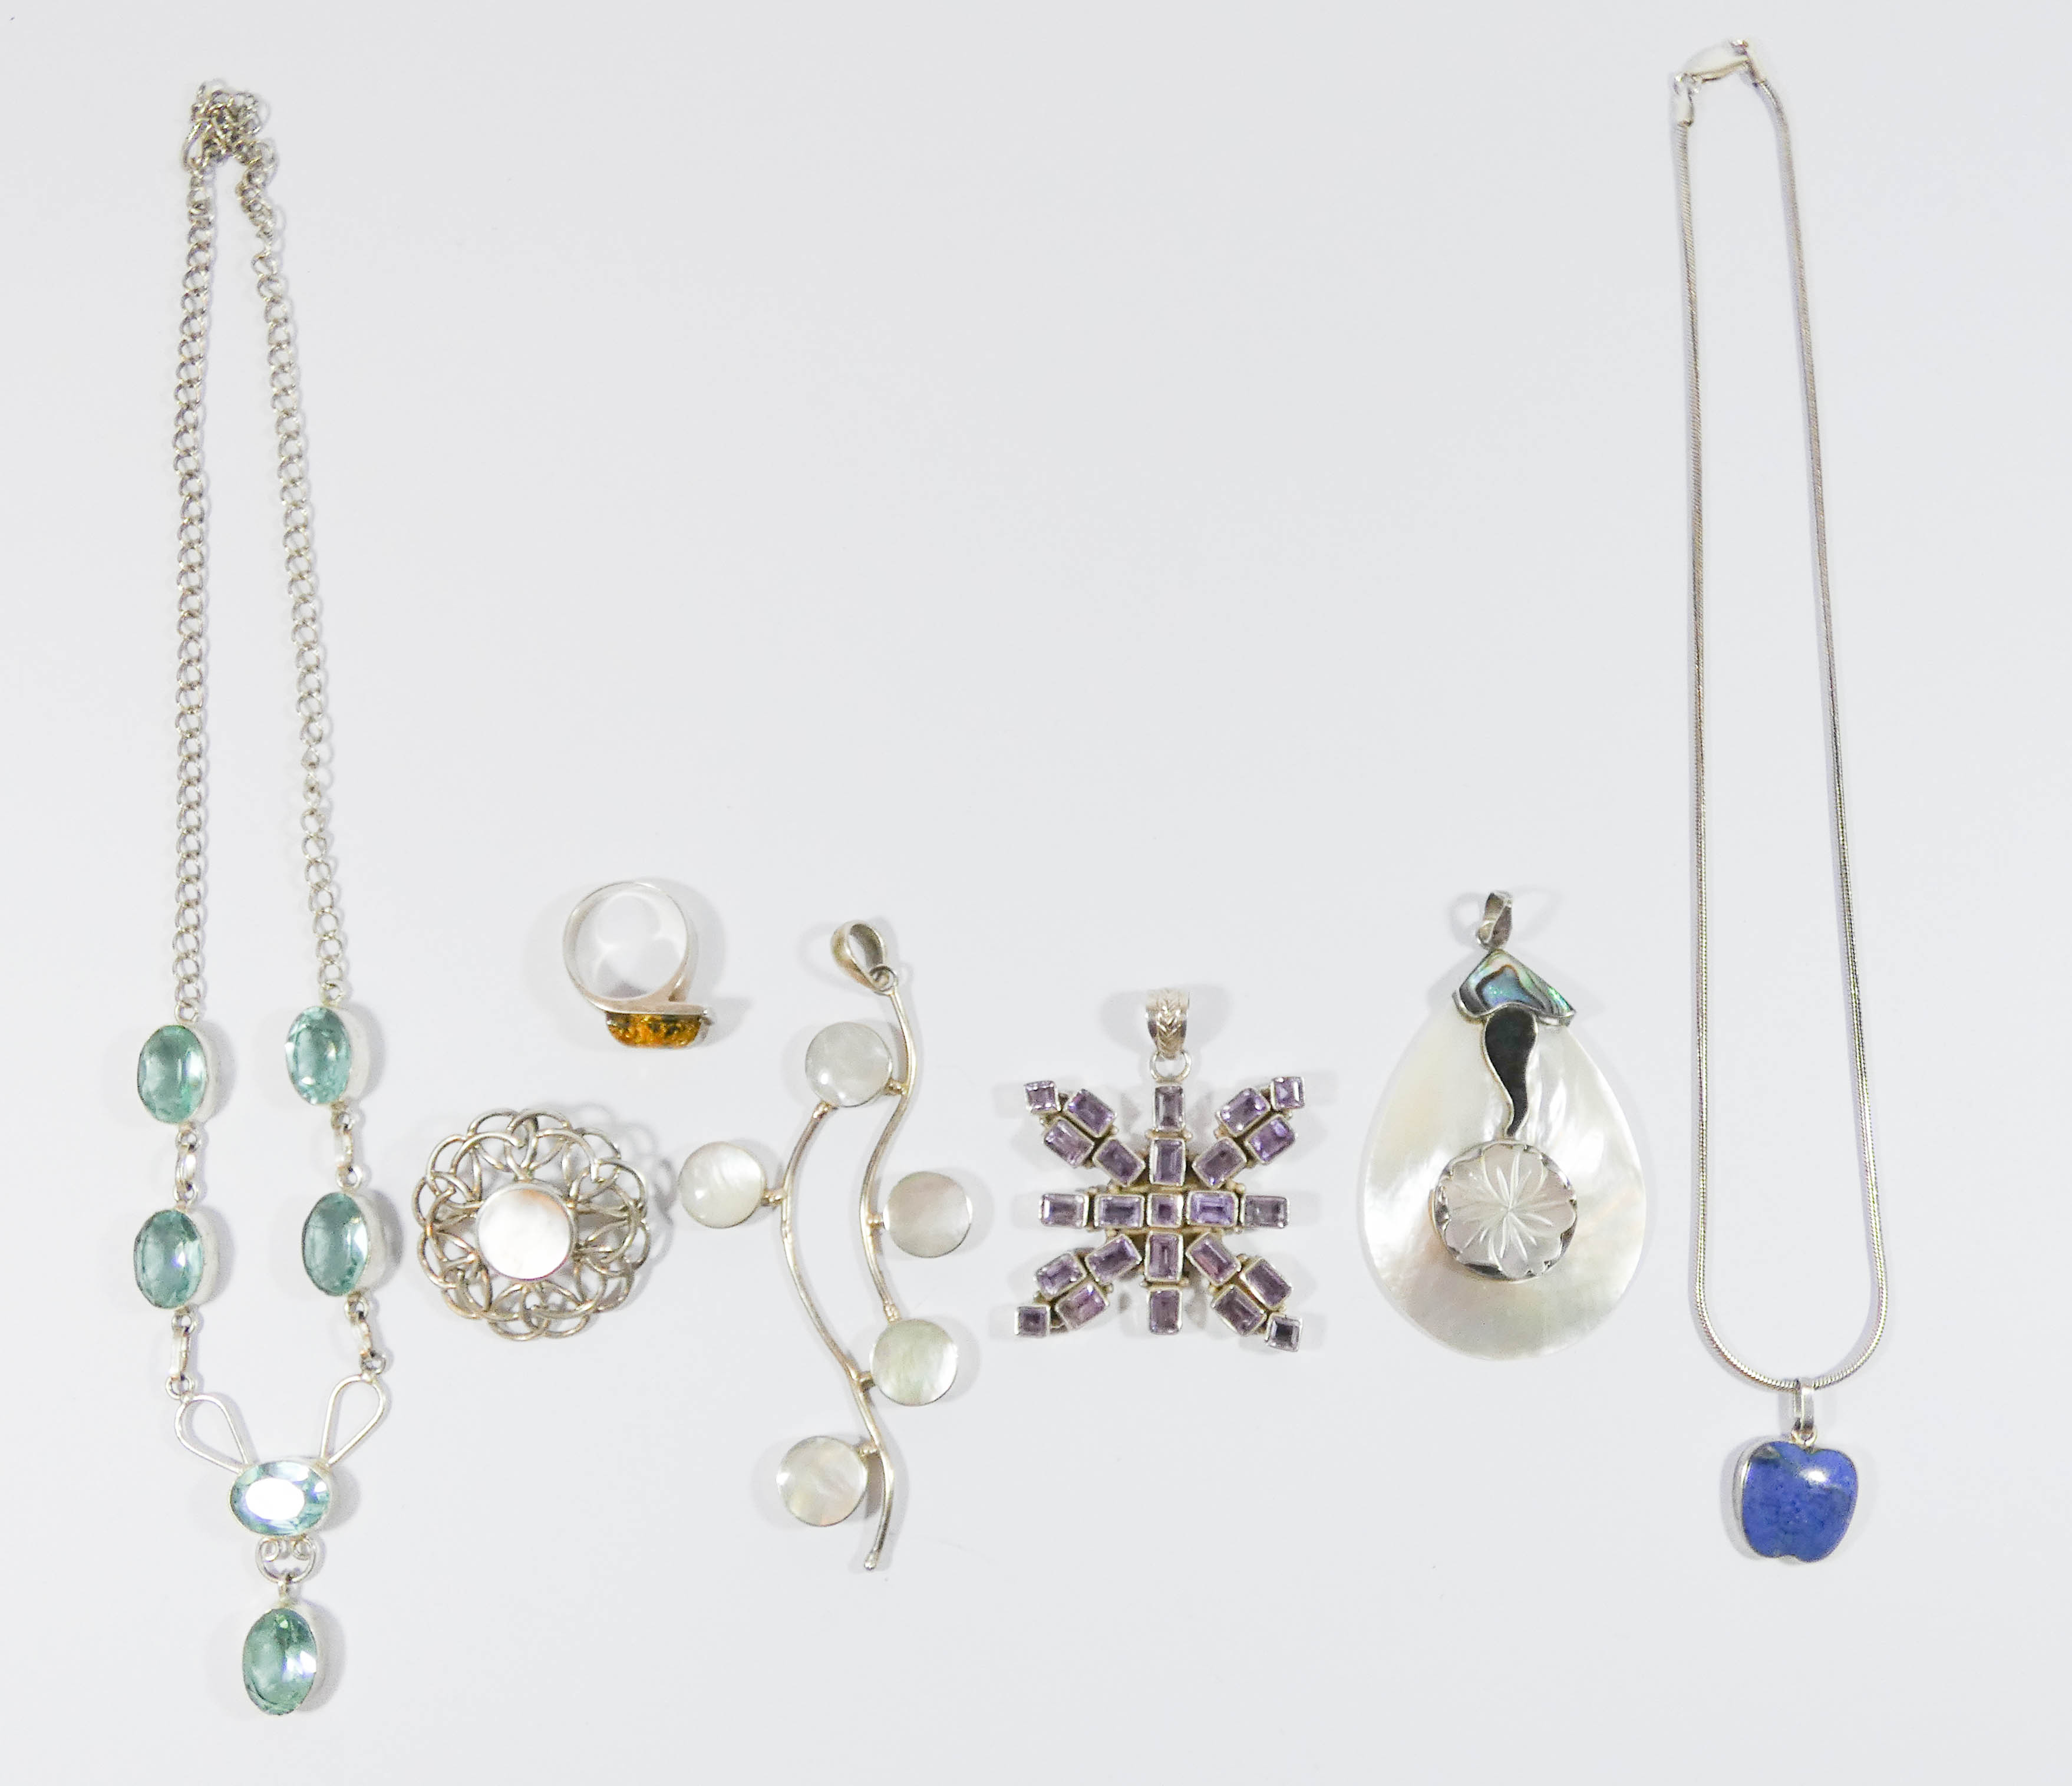 A collection of silver jewellery - mother of pearl set pendants,